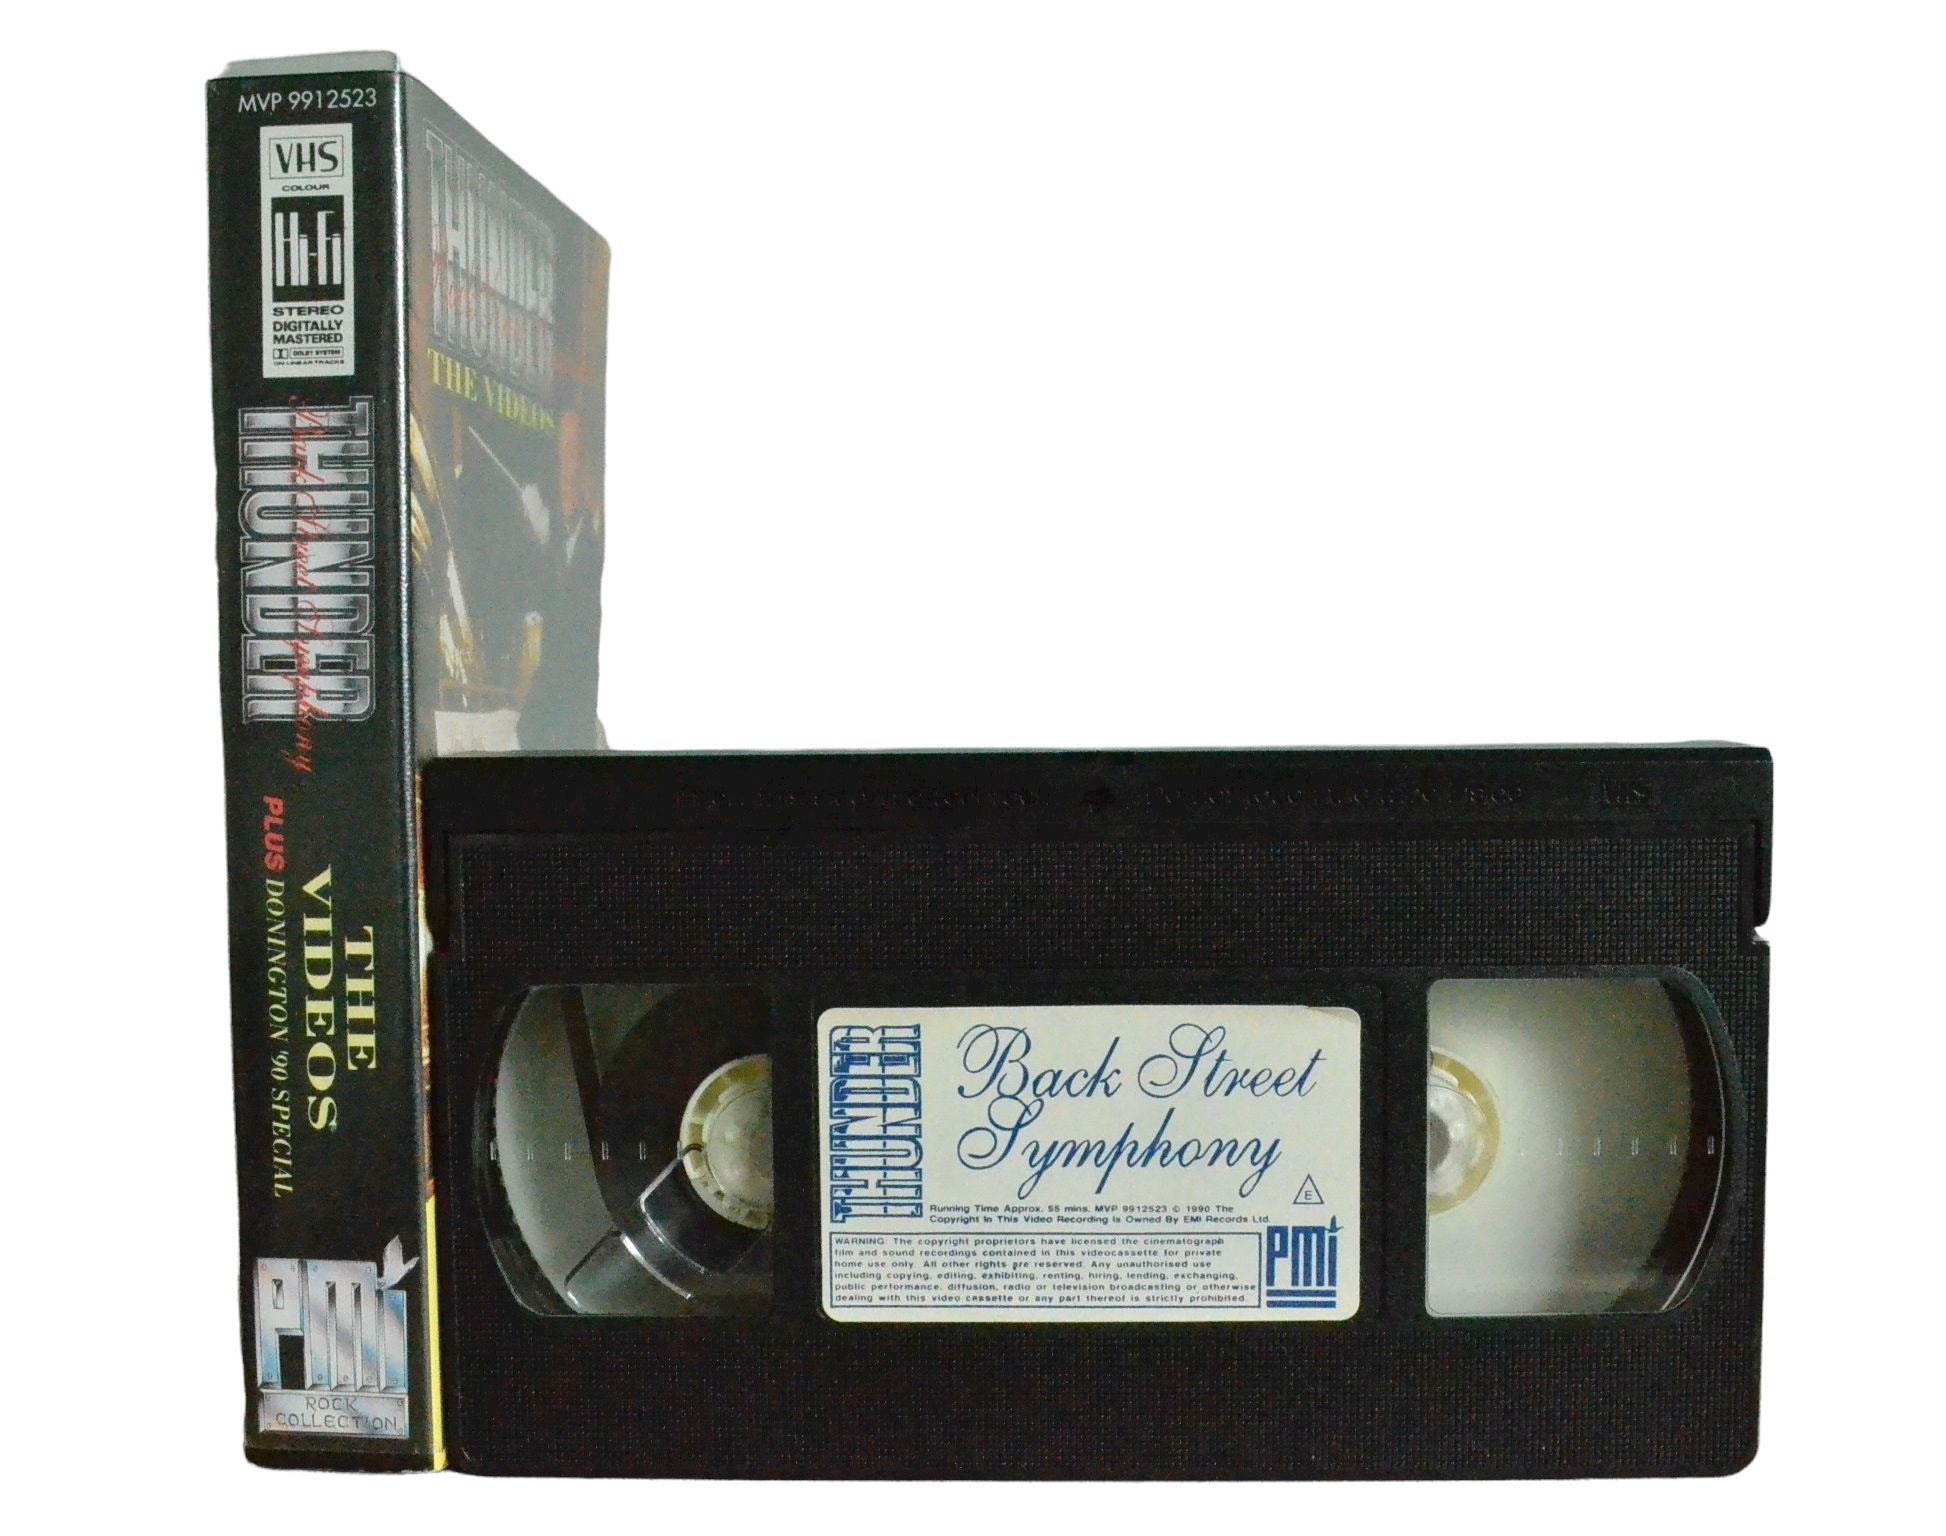 Back Street Symphony - Danny Bowes - Picture Music International - Music - Pal VHS-